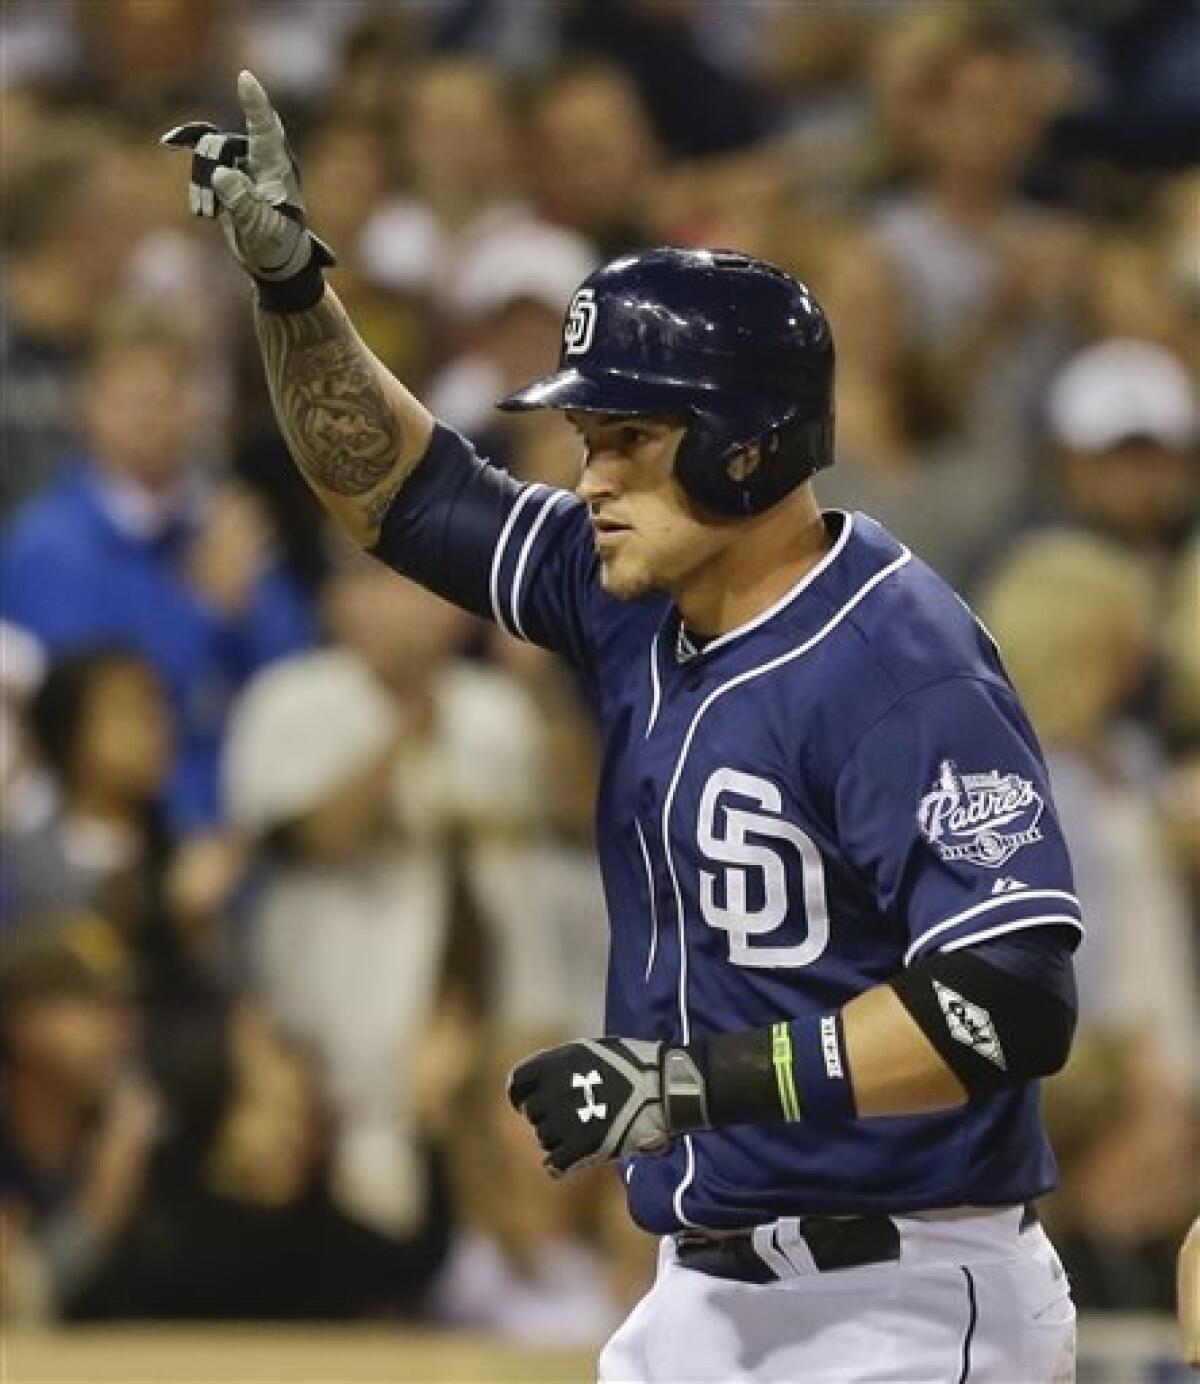 Yasmani Grandal suspended for testosterone use